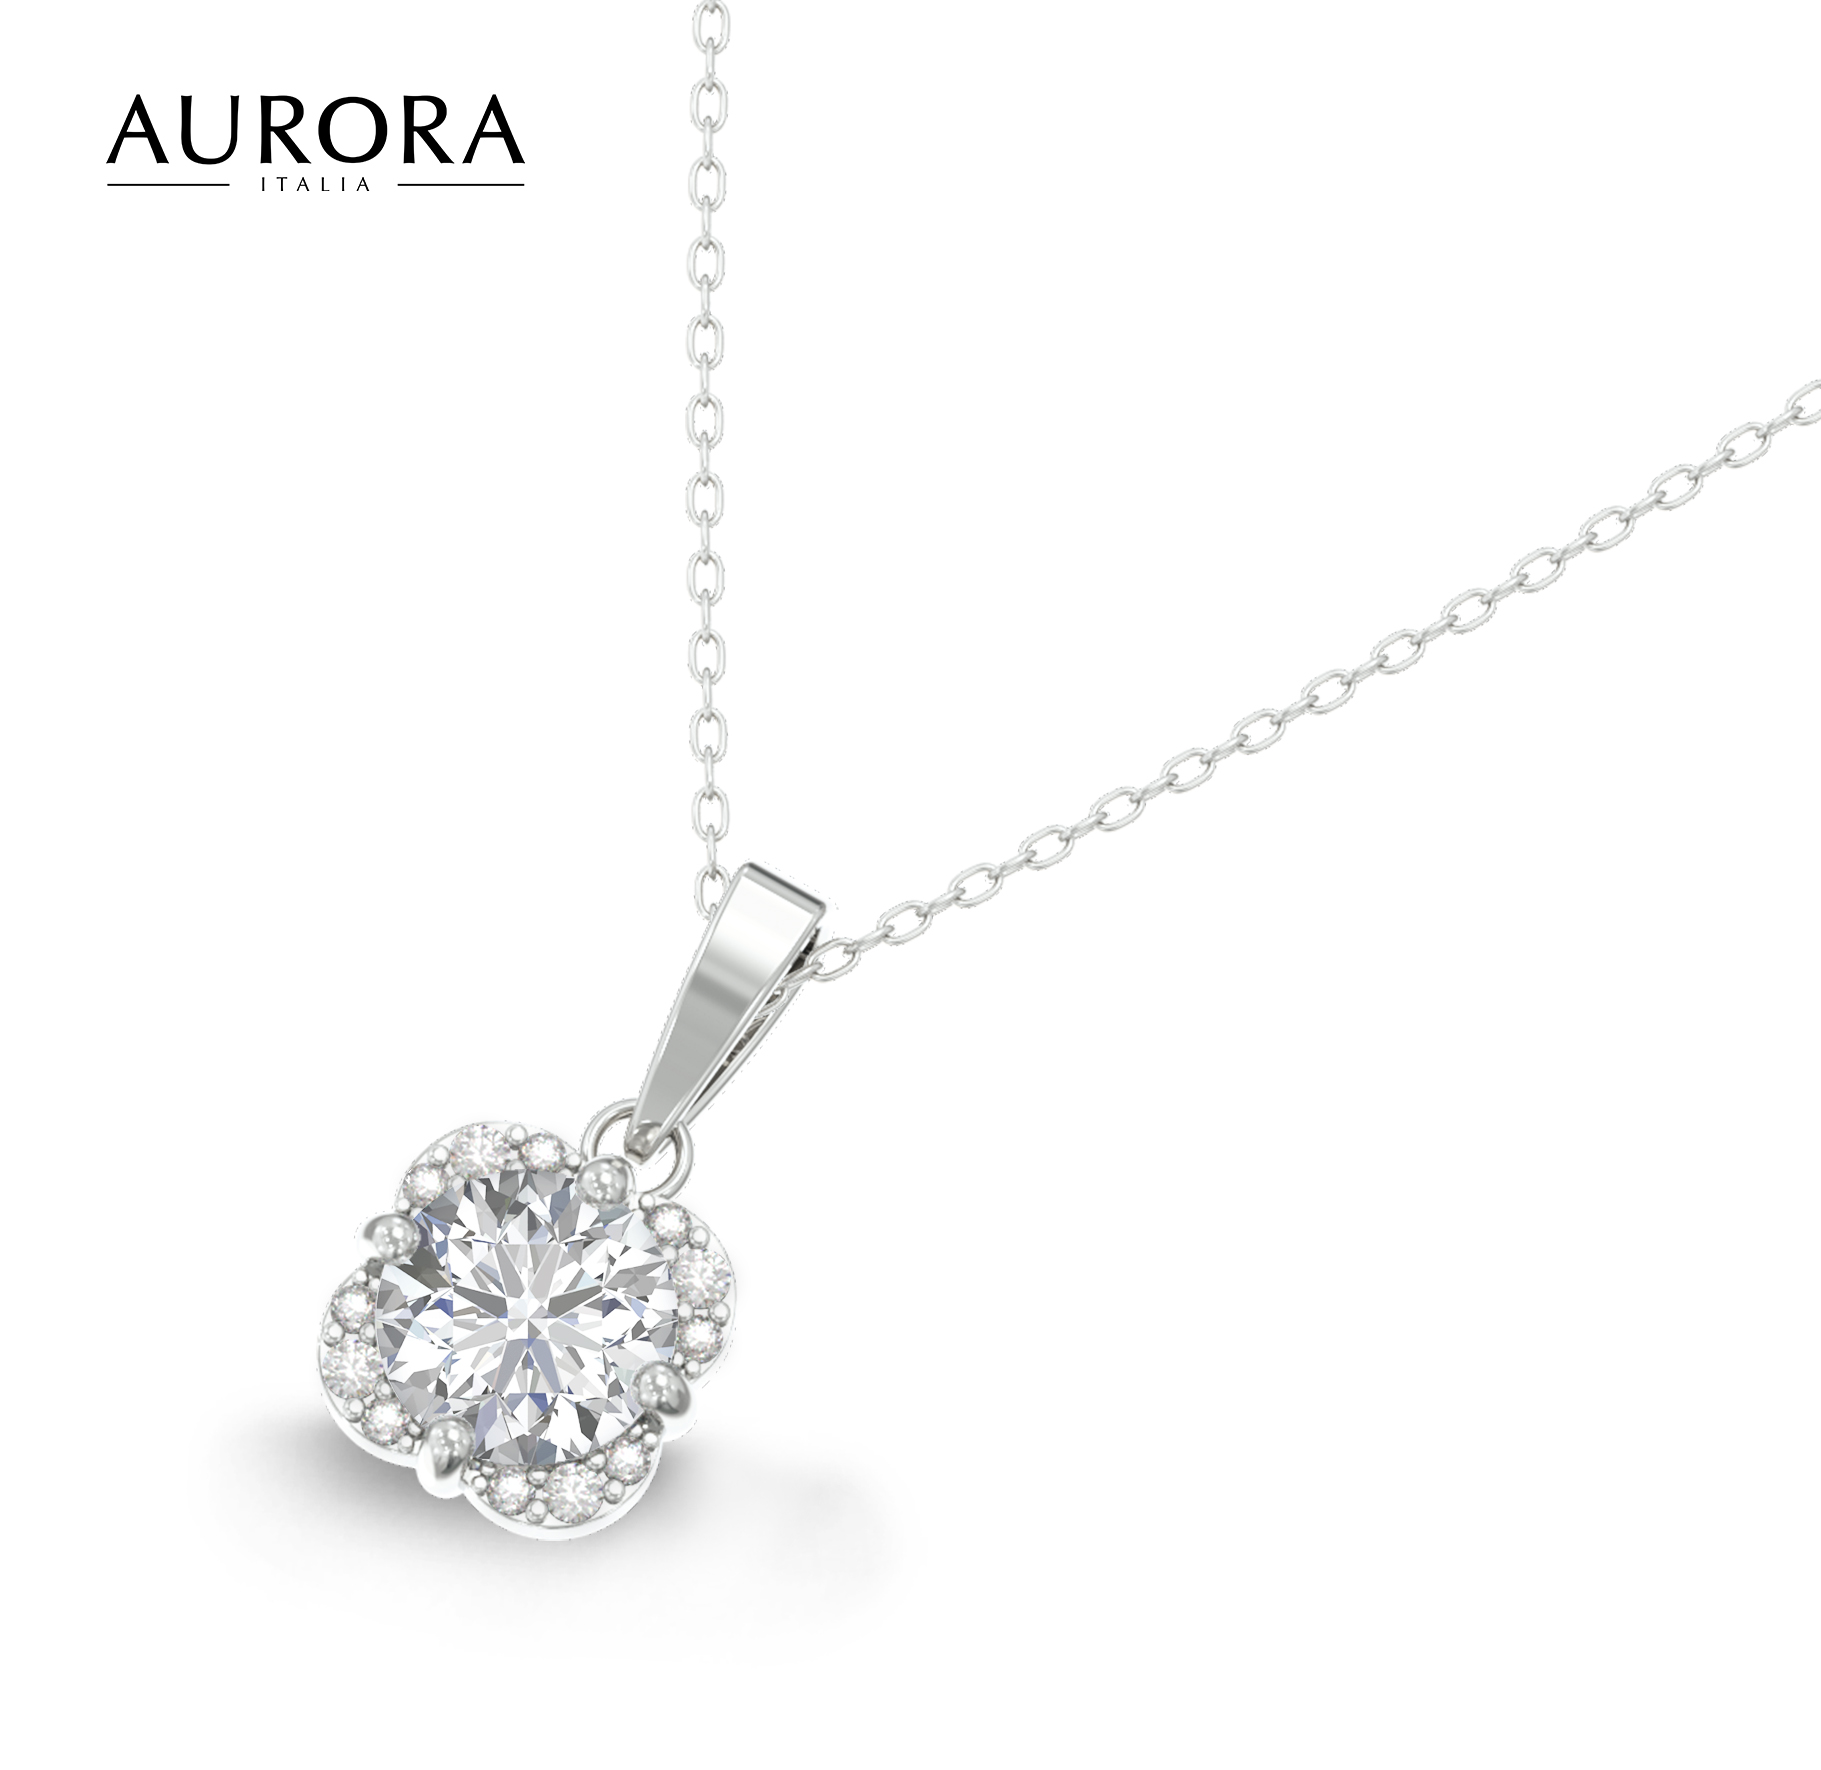 Winter Edition Pendant 925 Sterling Silver 18K White Gold Plated Auroses Four Seasons Collection